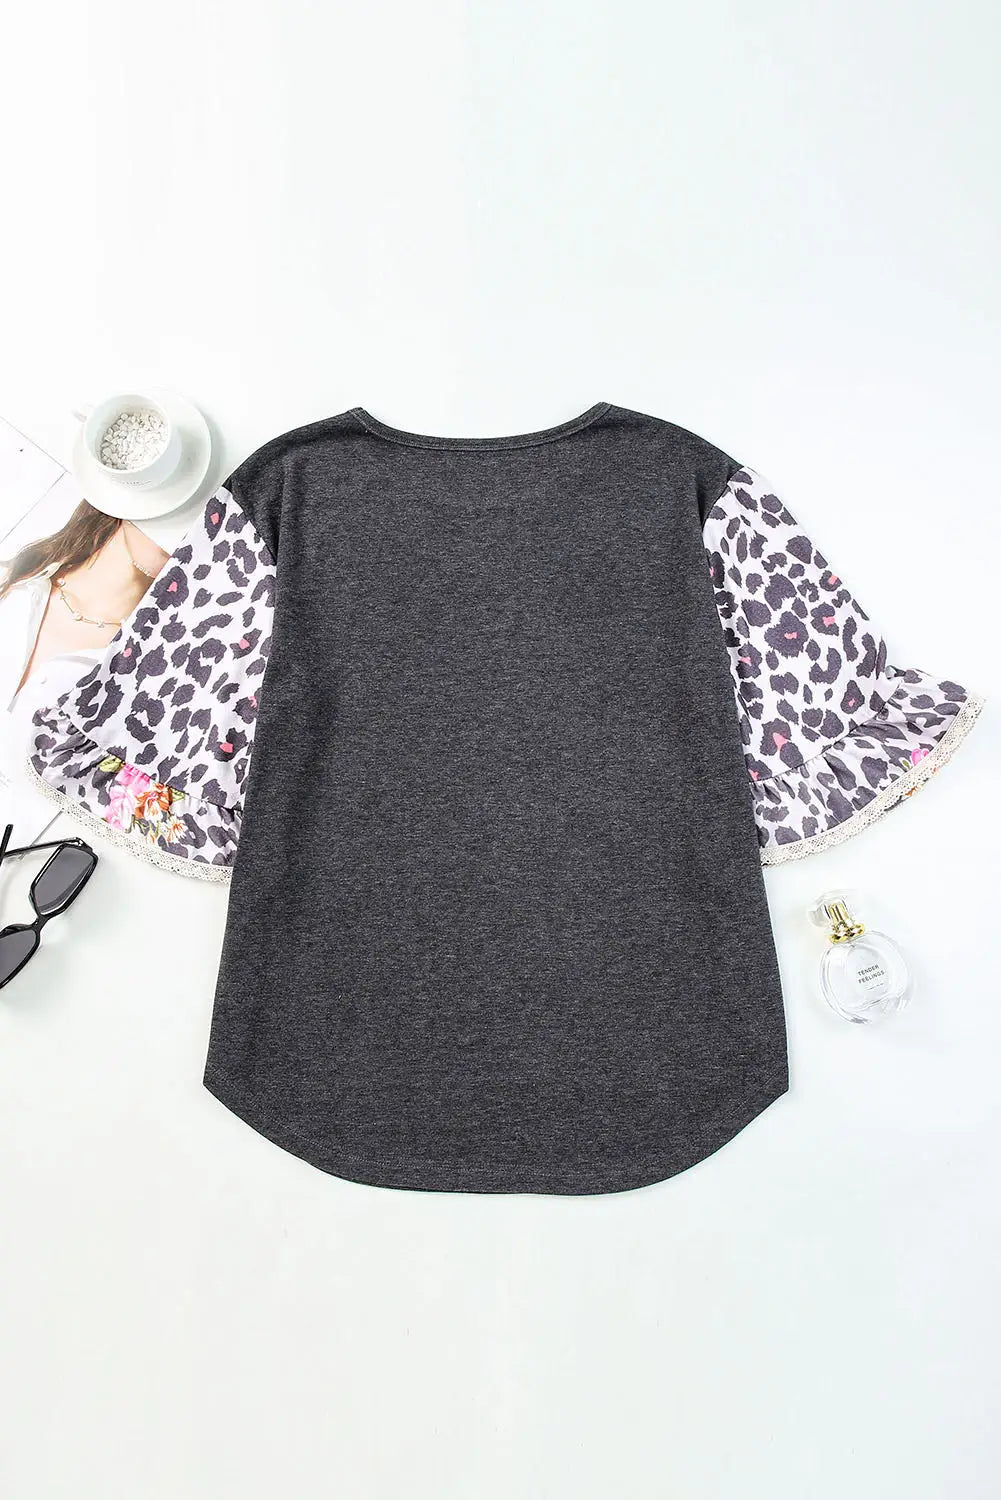 Black ruffle bell sleeve leopard floral patchwork top - t-shirts